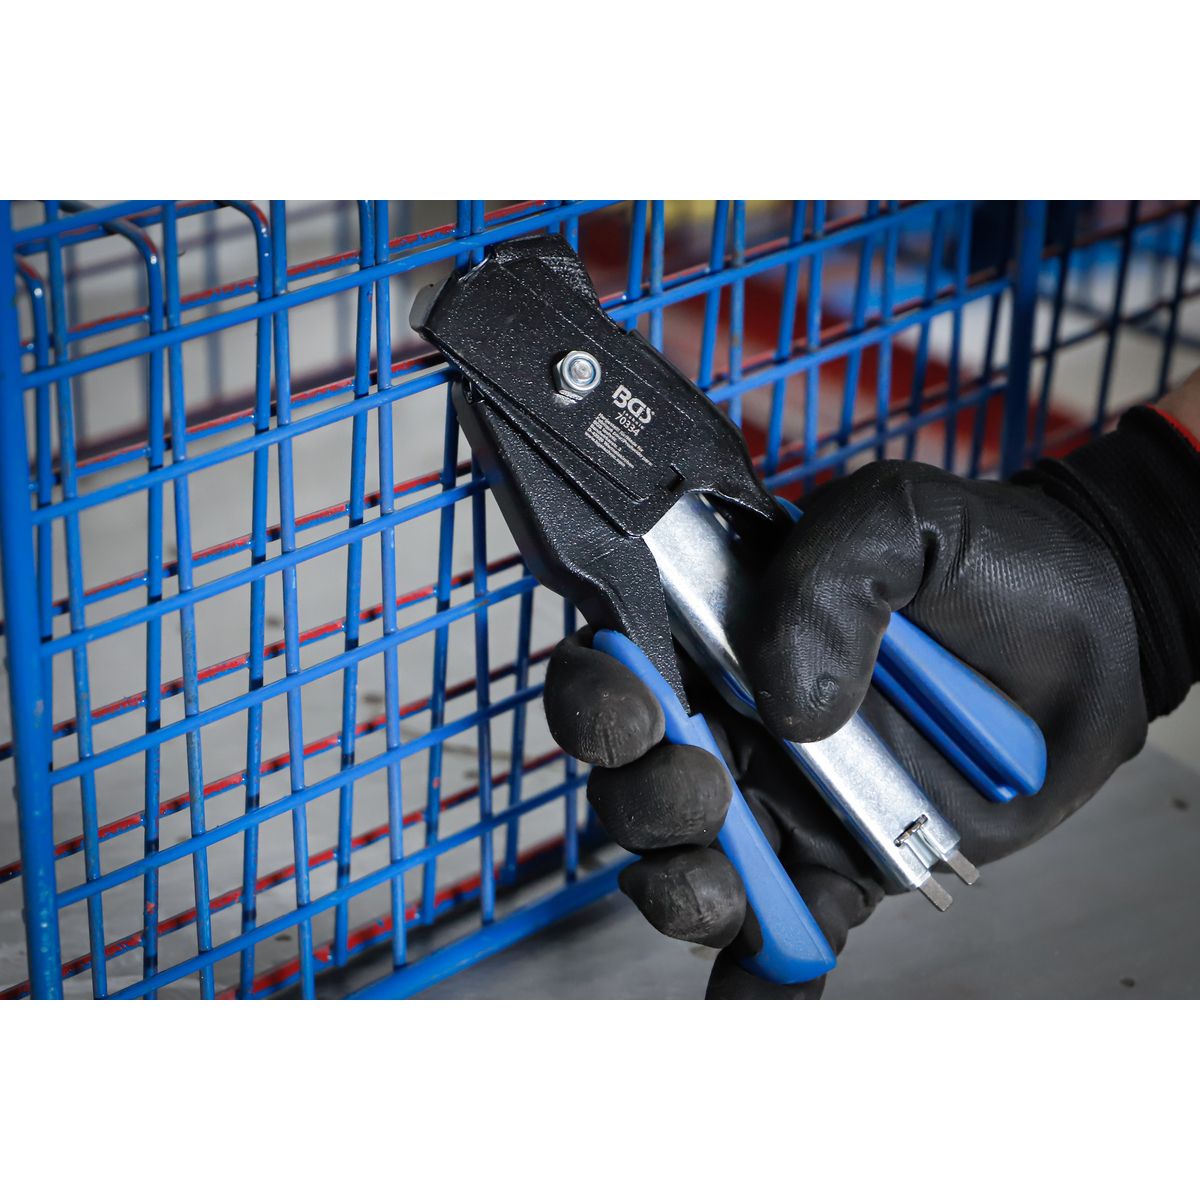 Hog Ring / Fence Ring Pliers | 185 mm